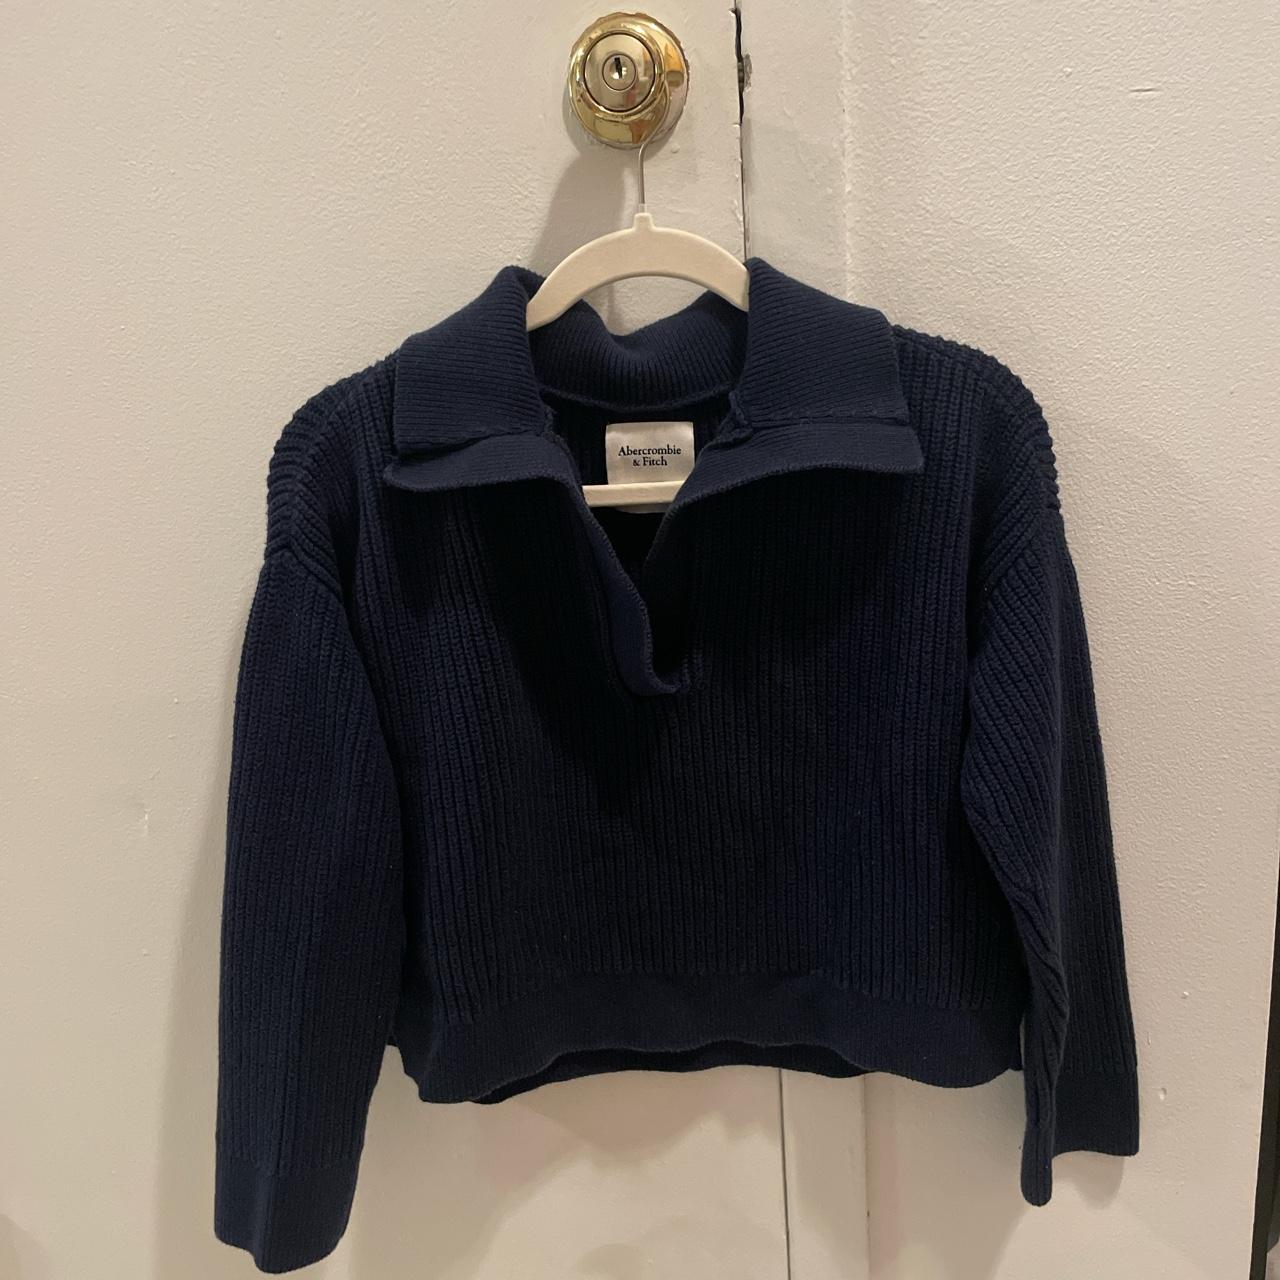 Abercrombie & Fitch Women's Navy and Blue Jumper | Depop